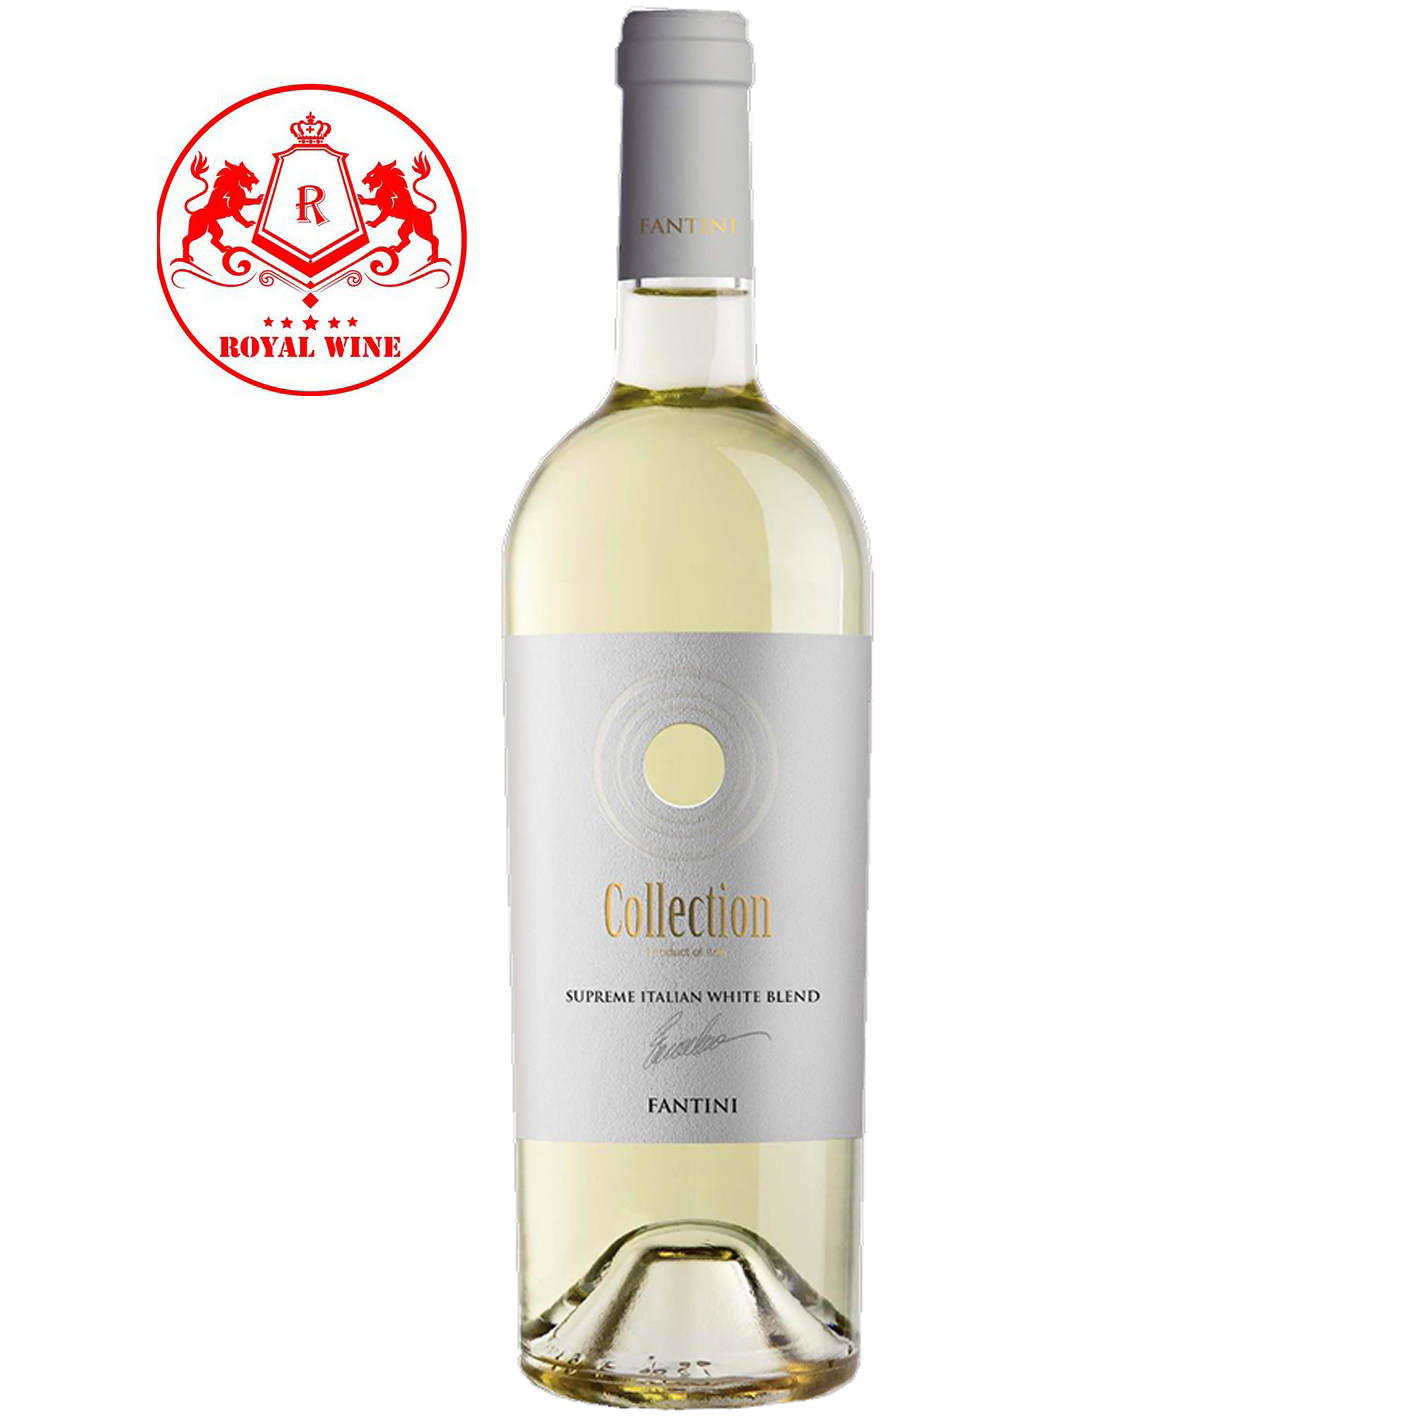 COLLECTION Fantini White Blend